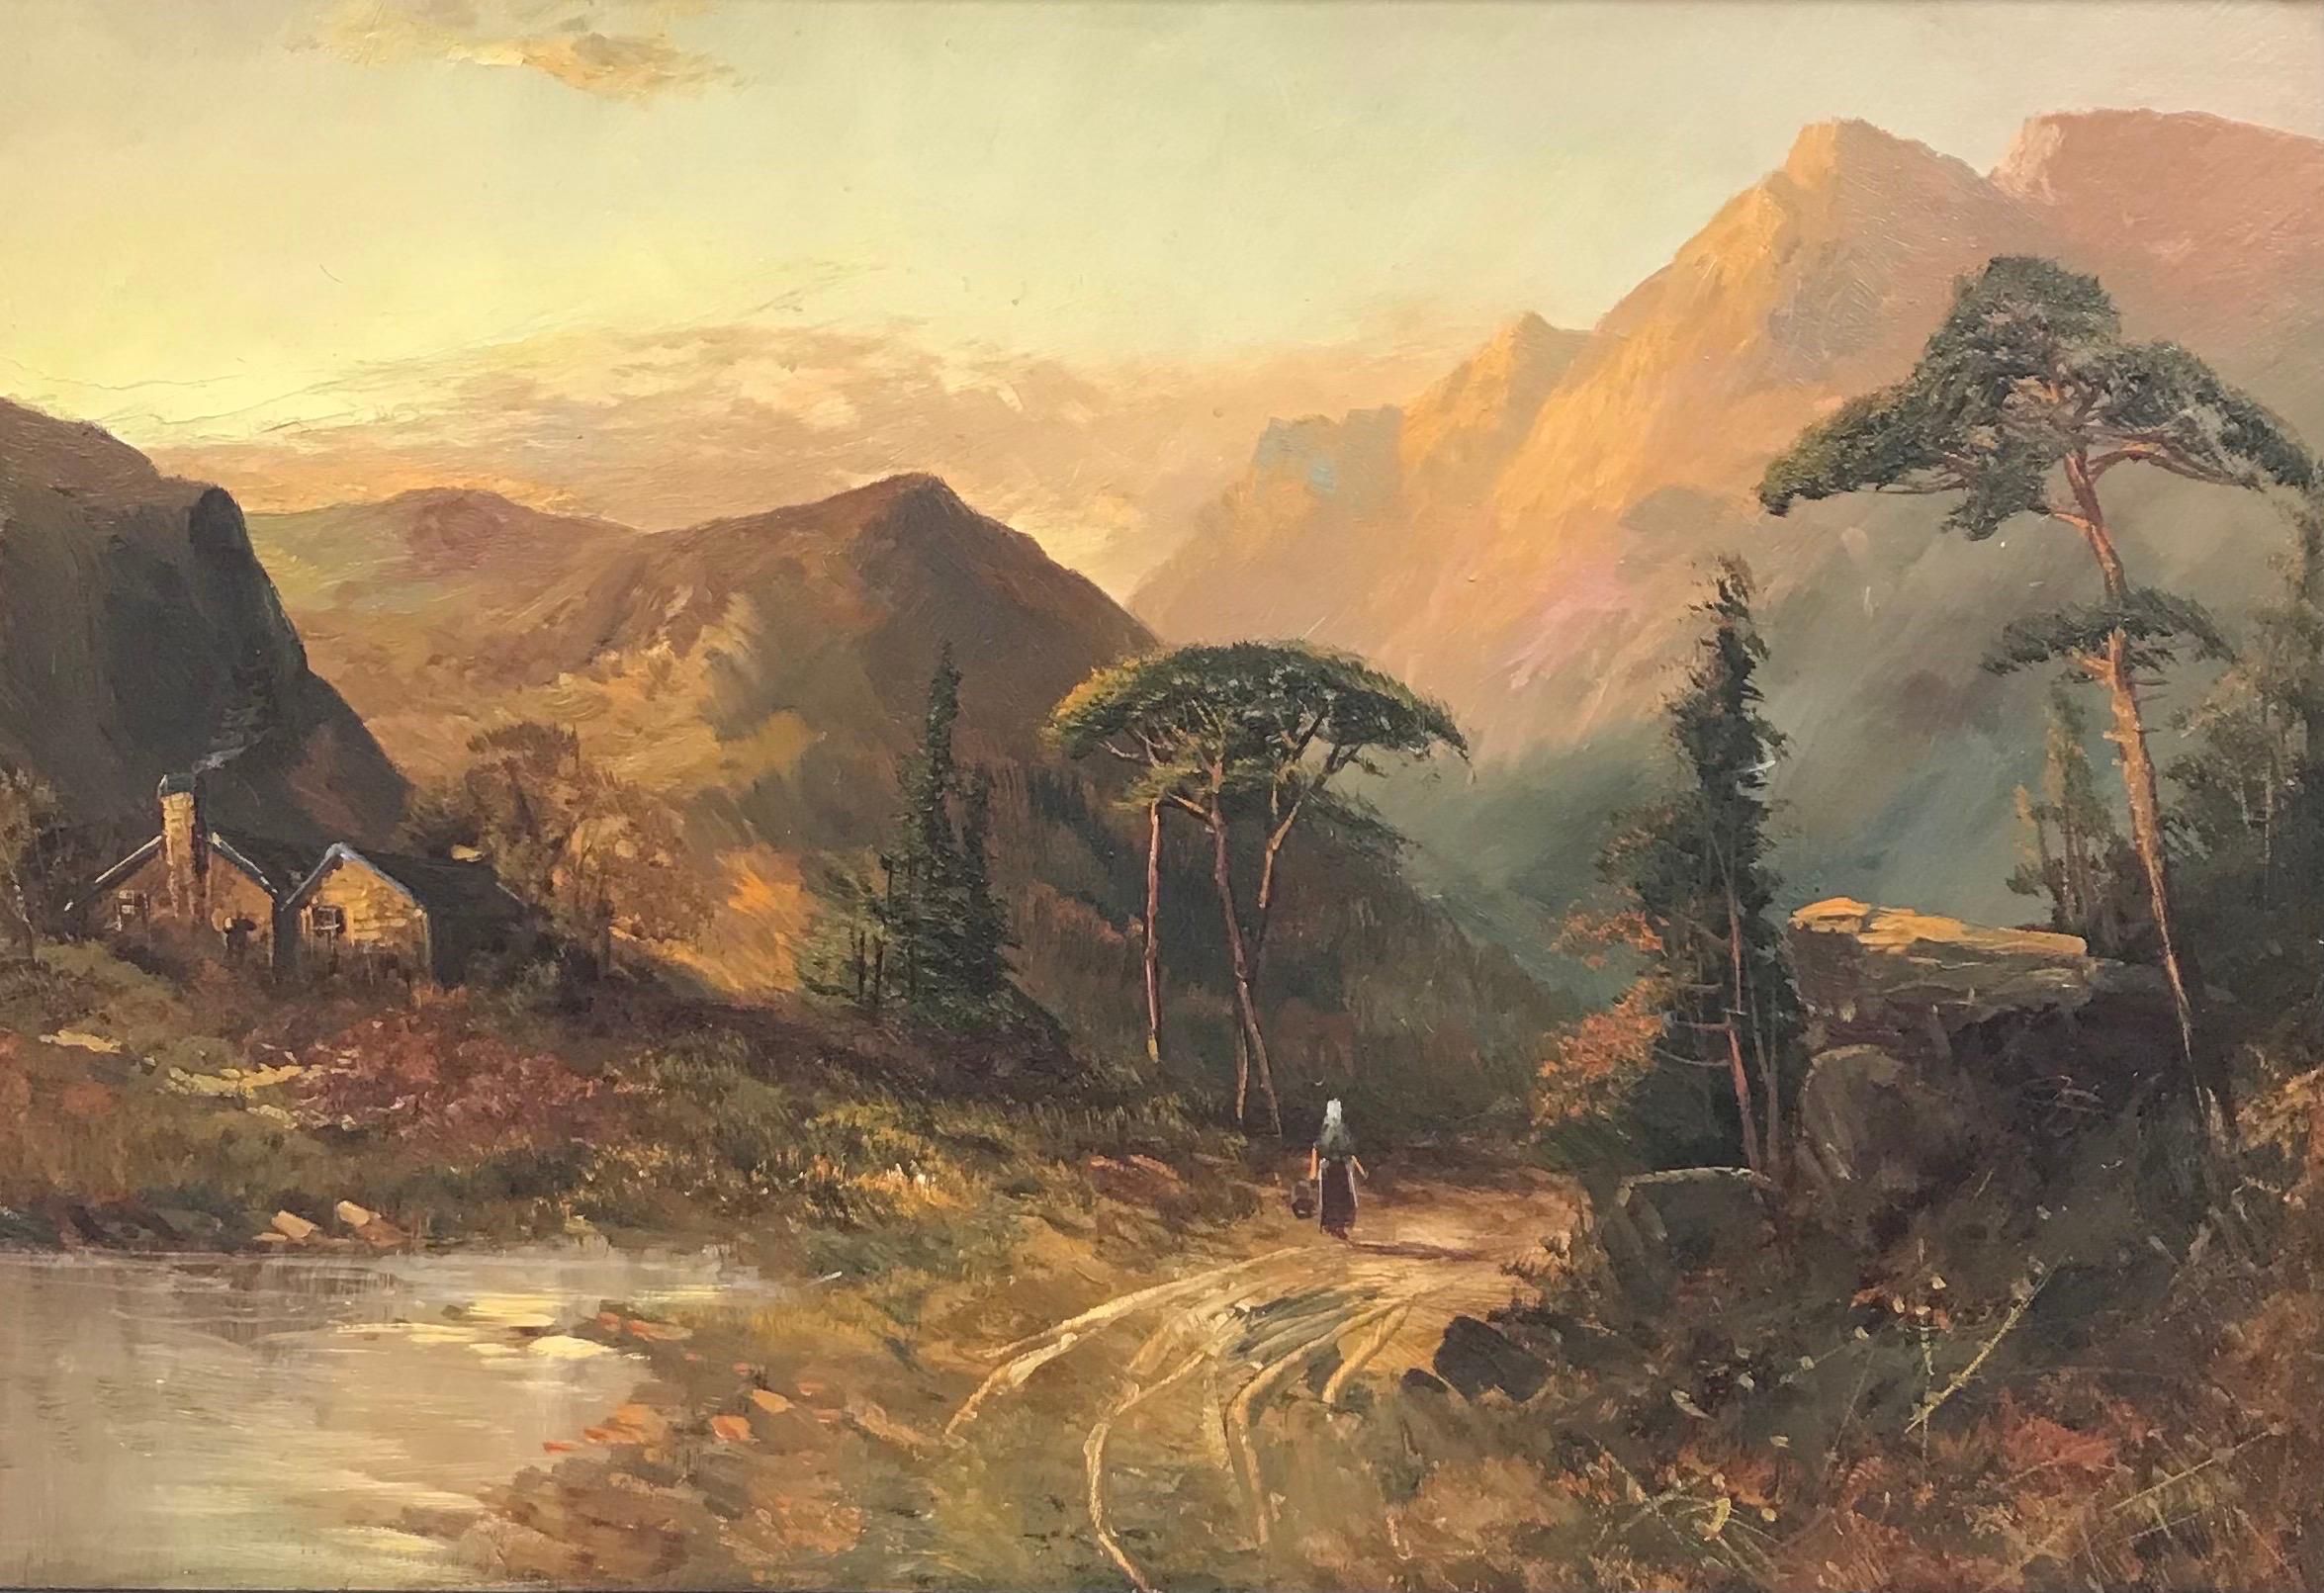 Francis E. Jamieson Landscape Painting - Antique Scottish Highlands Oil Painting Sunset Mountain Figure in River Glen